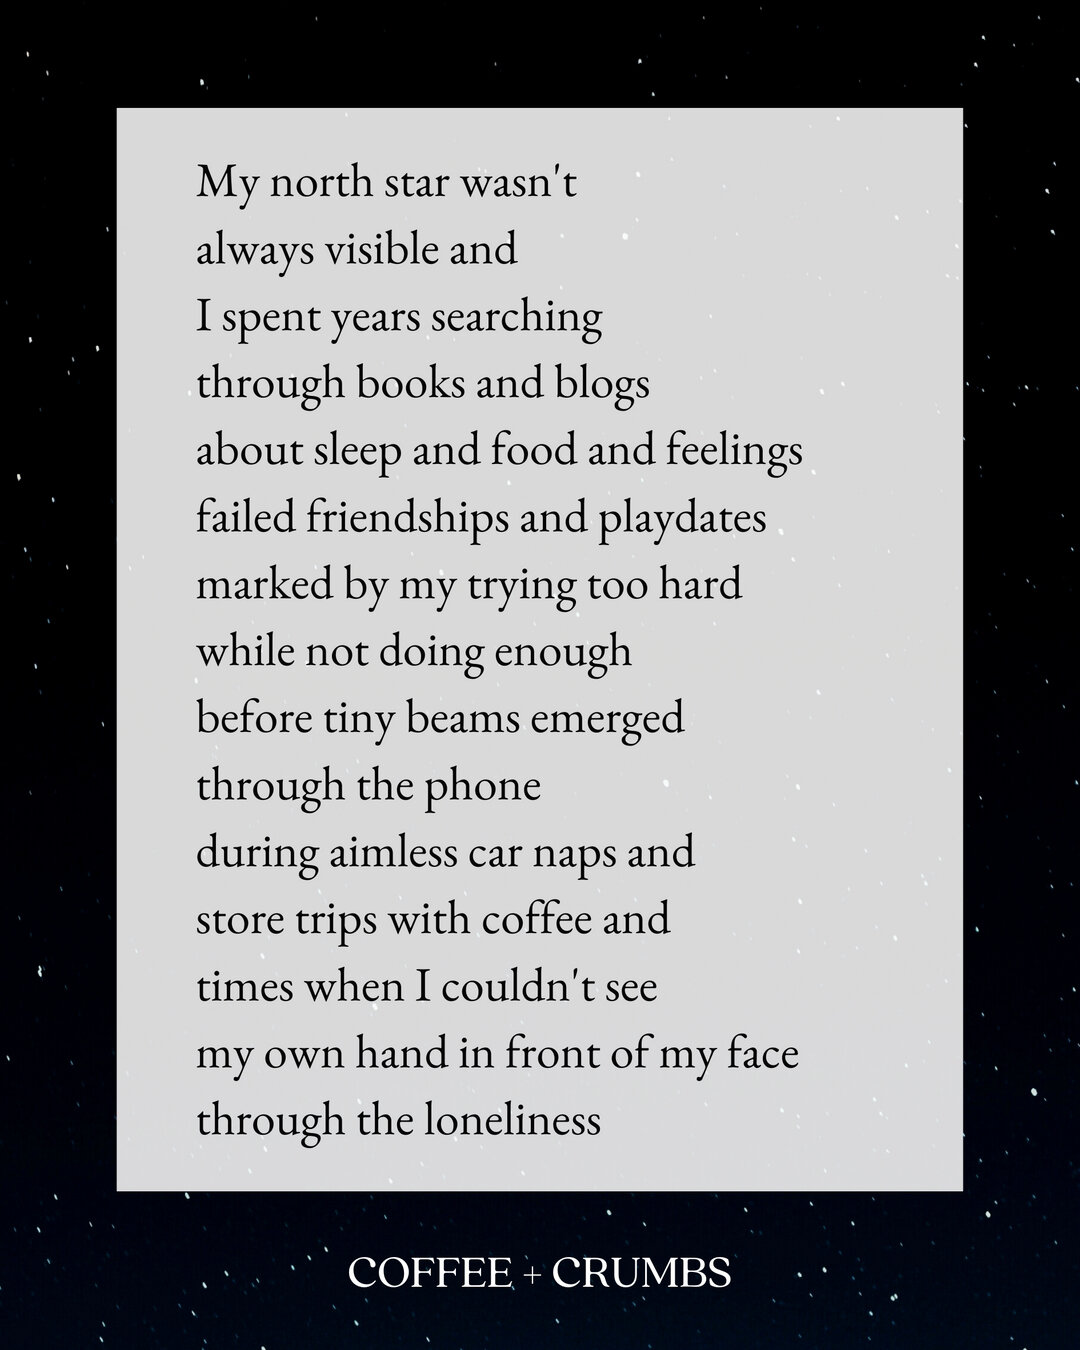 My north star wasn't​​​​​​​​​
always visible and
I spent years searching
through books and blogs
about sleep and food and feelings
failed friendships and playdates
marked by my trying too hard
while not doing enough
before tiny beams emerged
through 